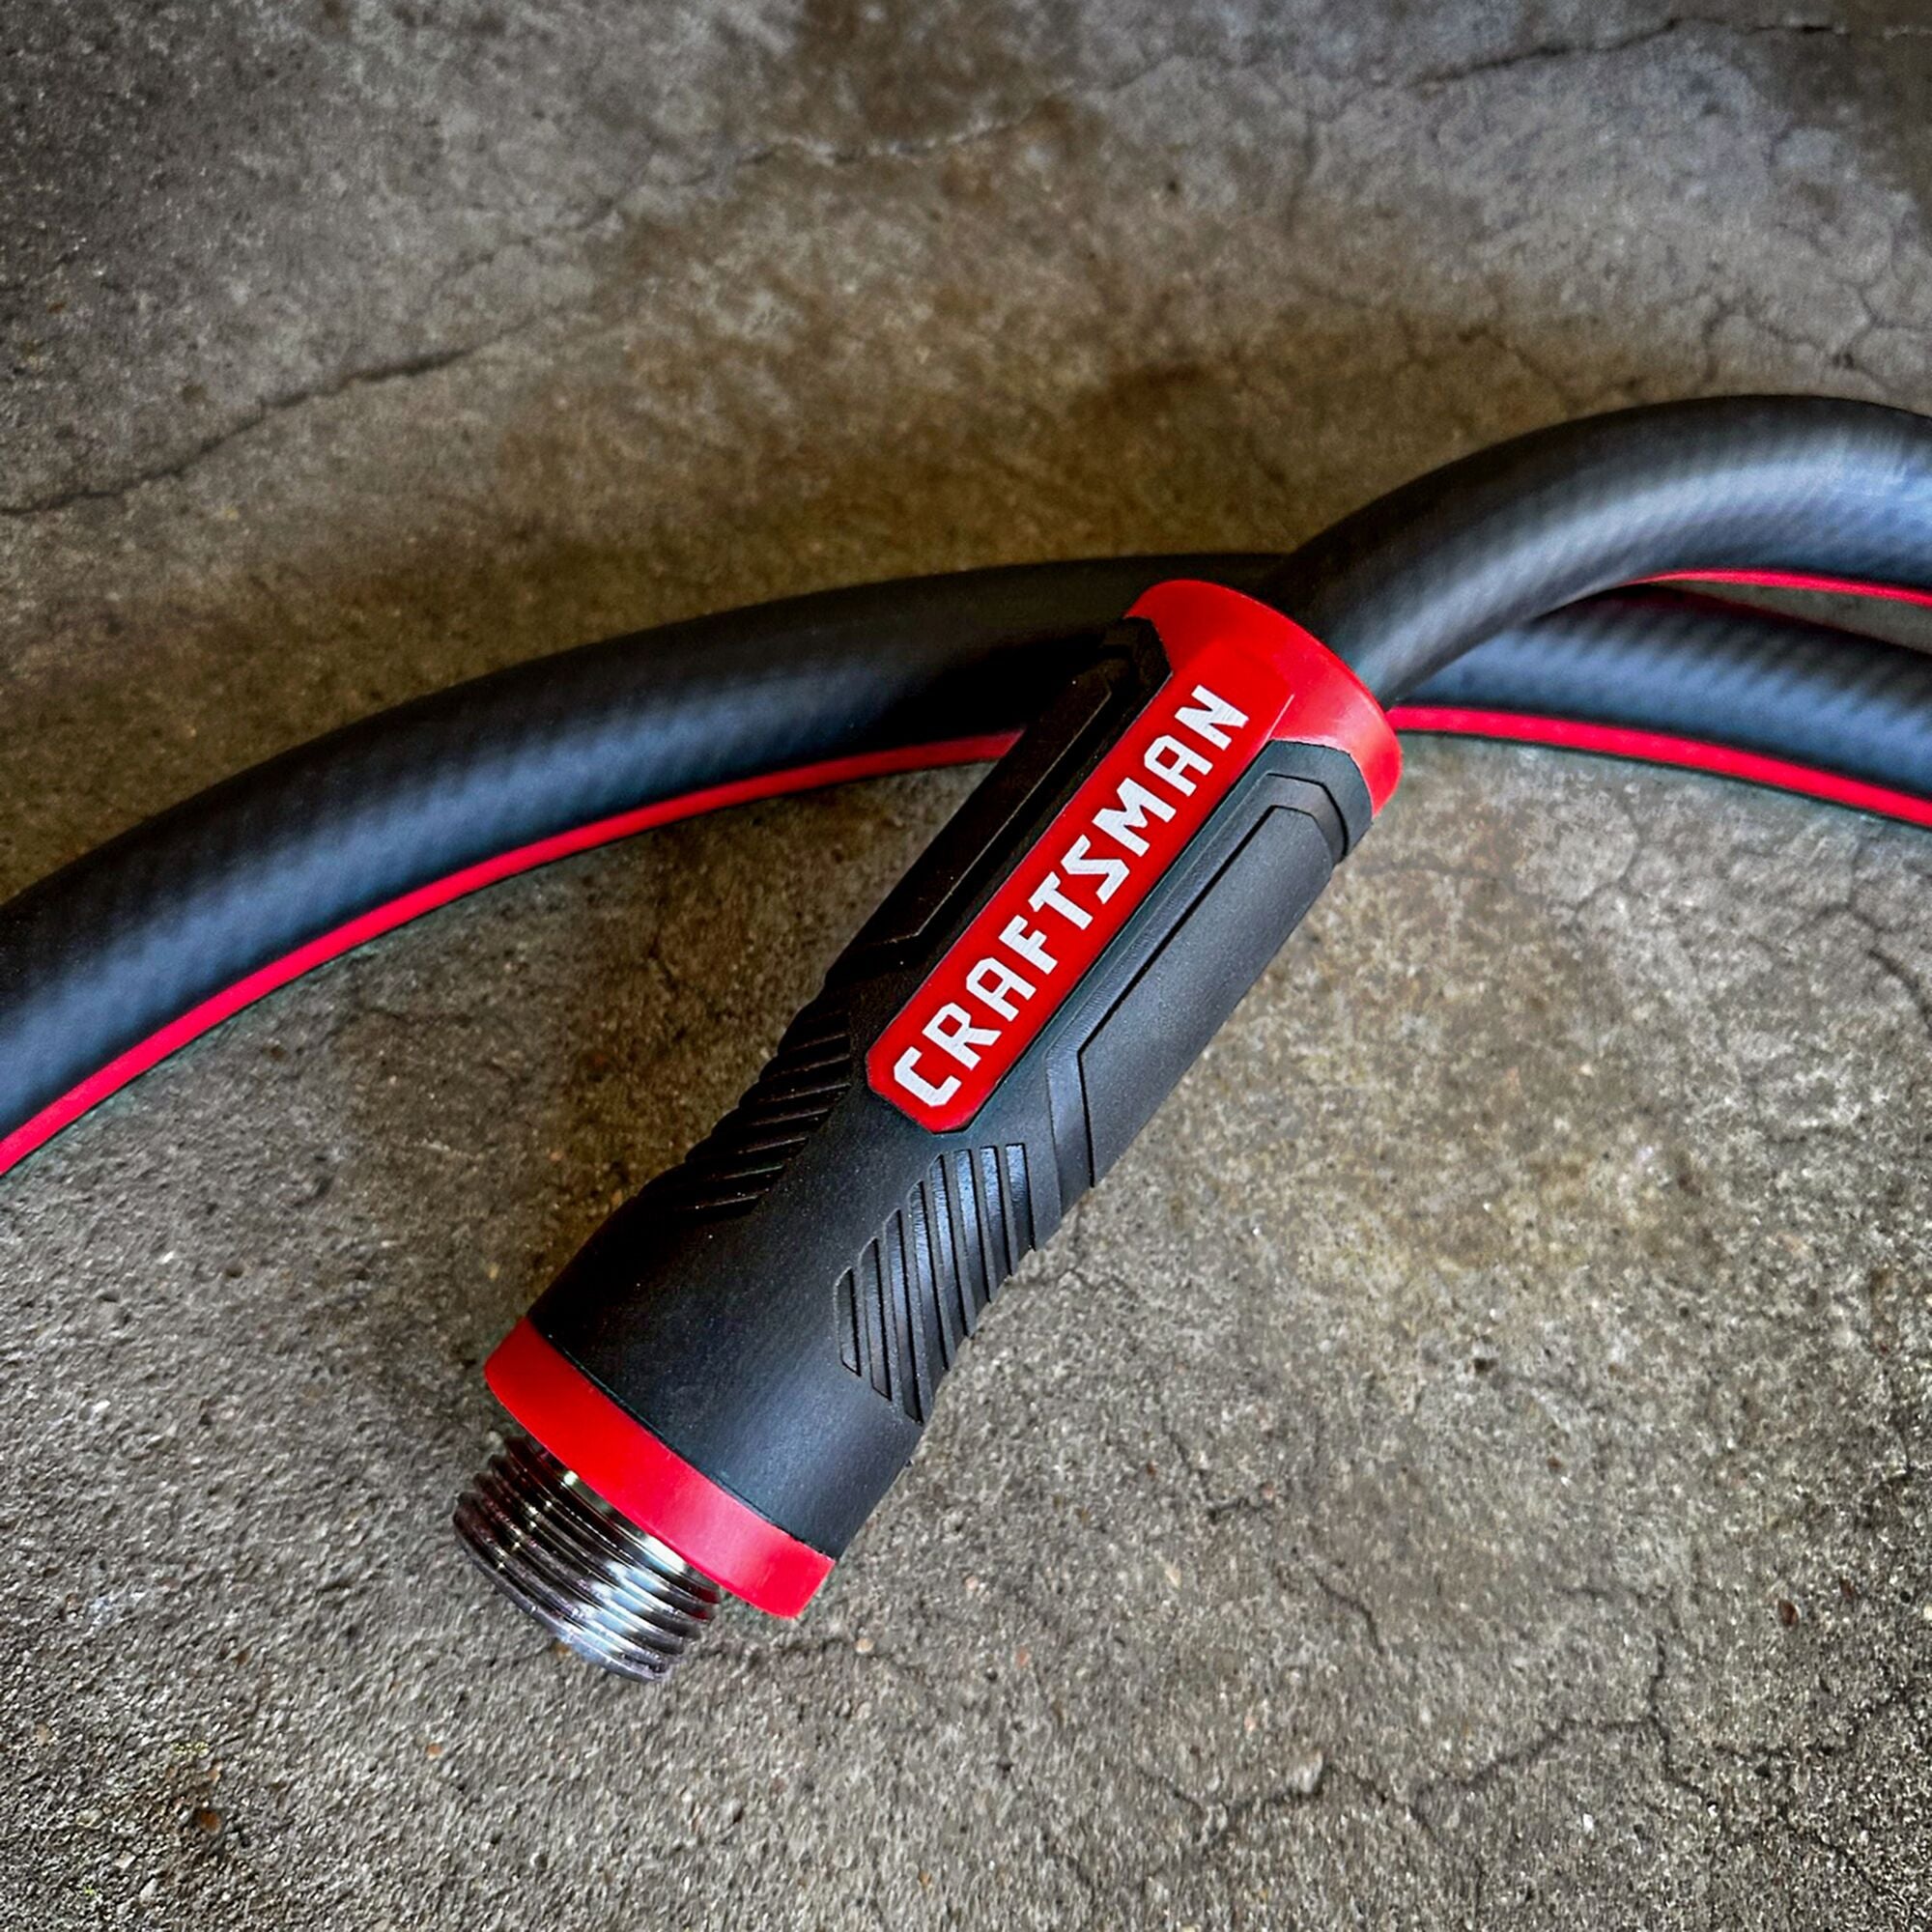 Craftsman black and red professional-grade water hose featuring its easy grip male end coupling.  